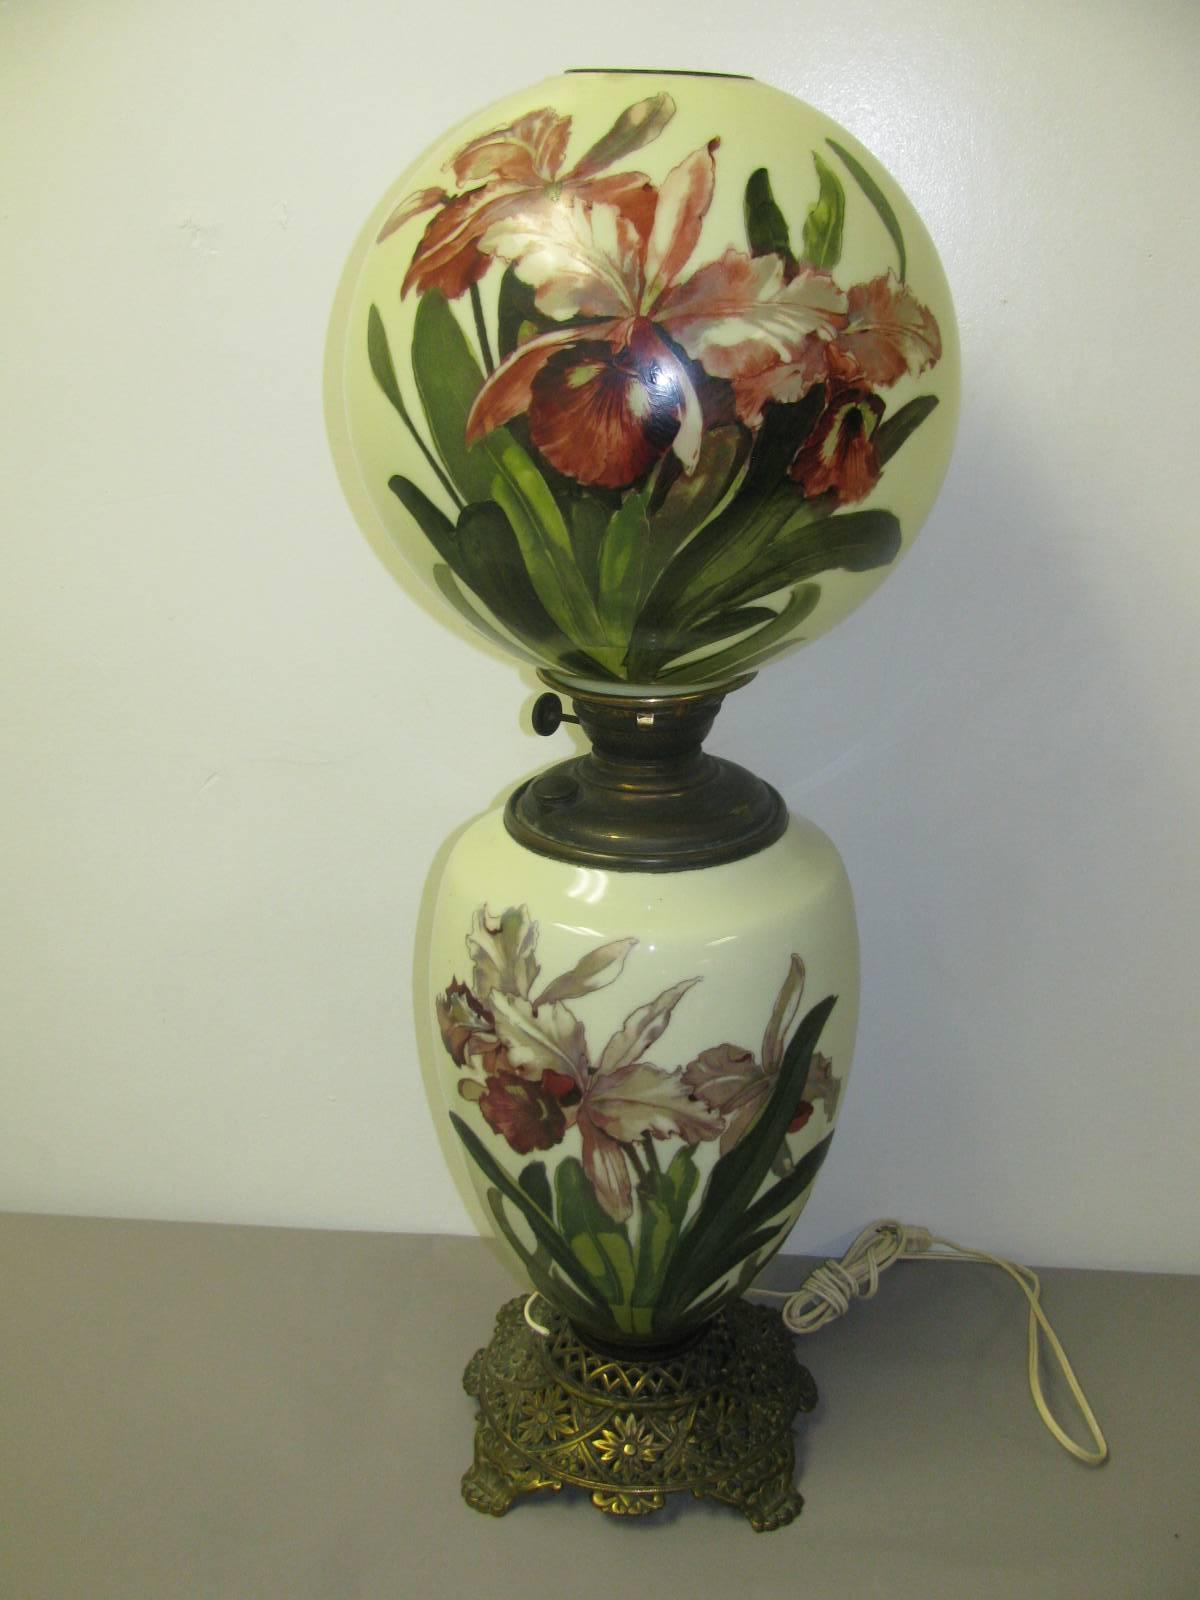 Fabulous and large, 33 inches tall, all original with the exception of being electrified. Beautifully hand-painted floral scene on both top and bottom glass shades.